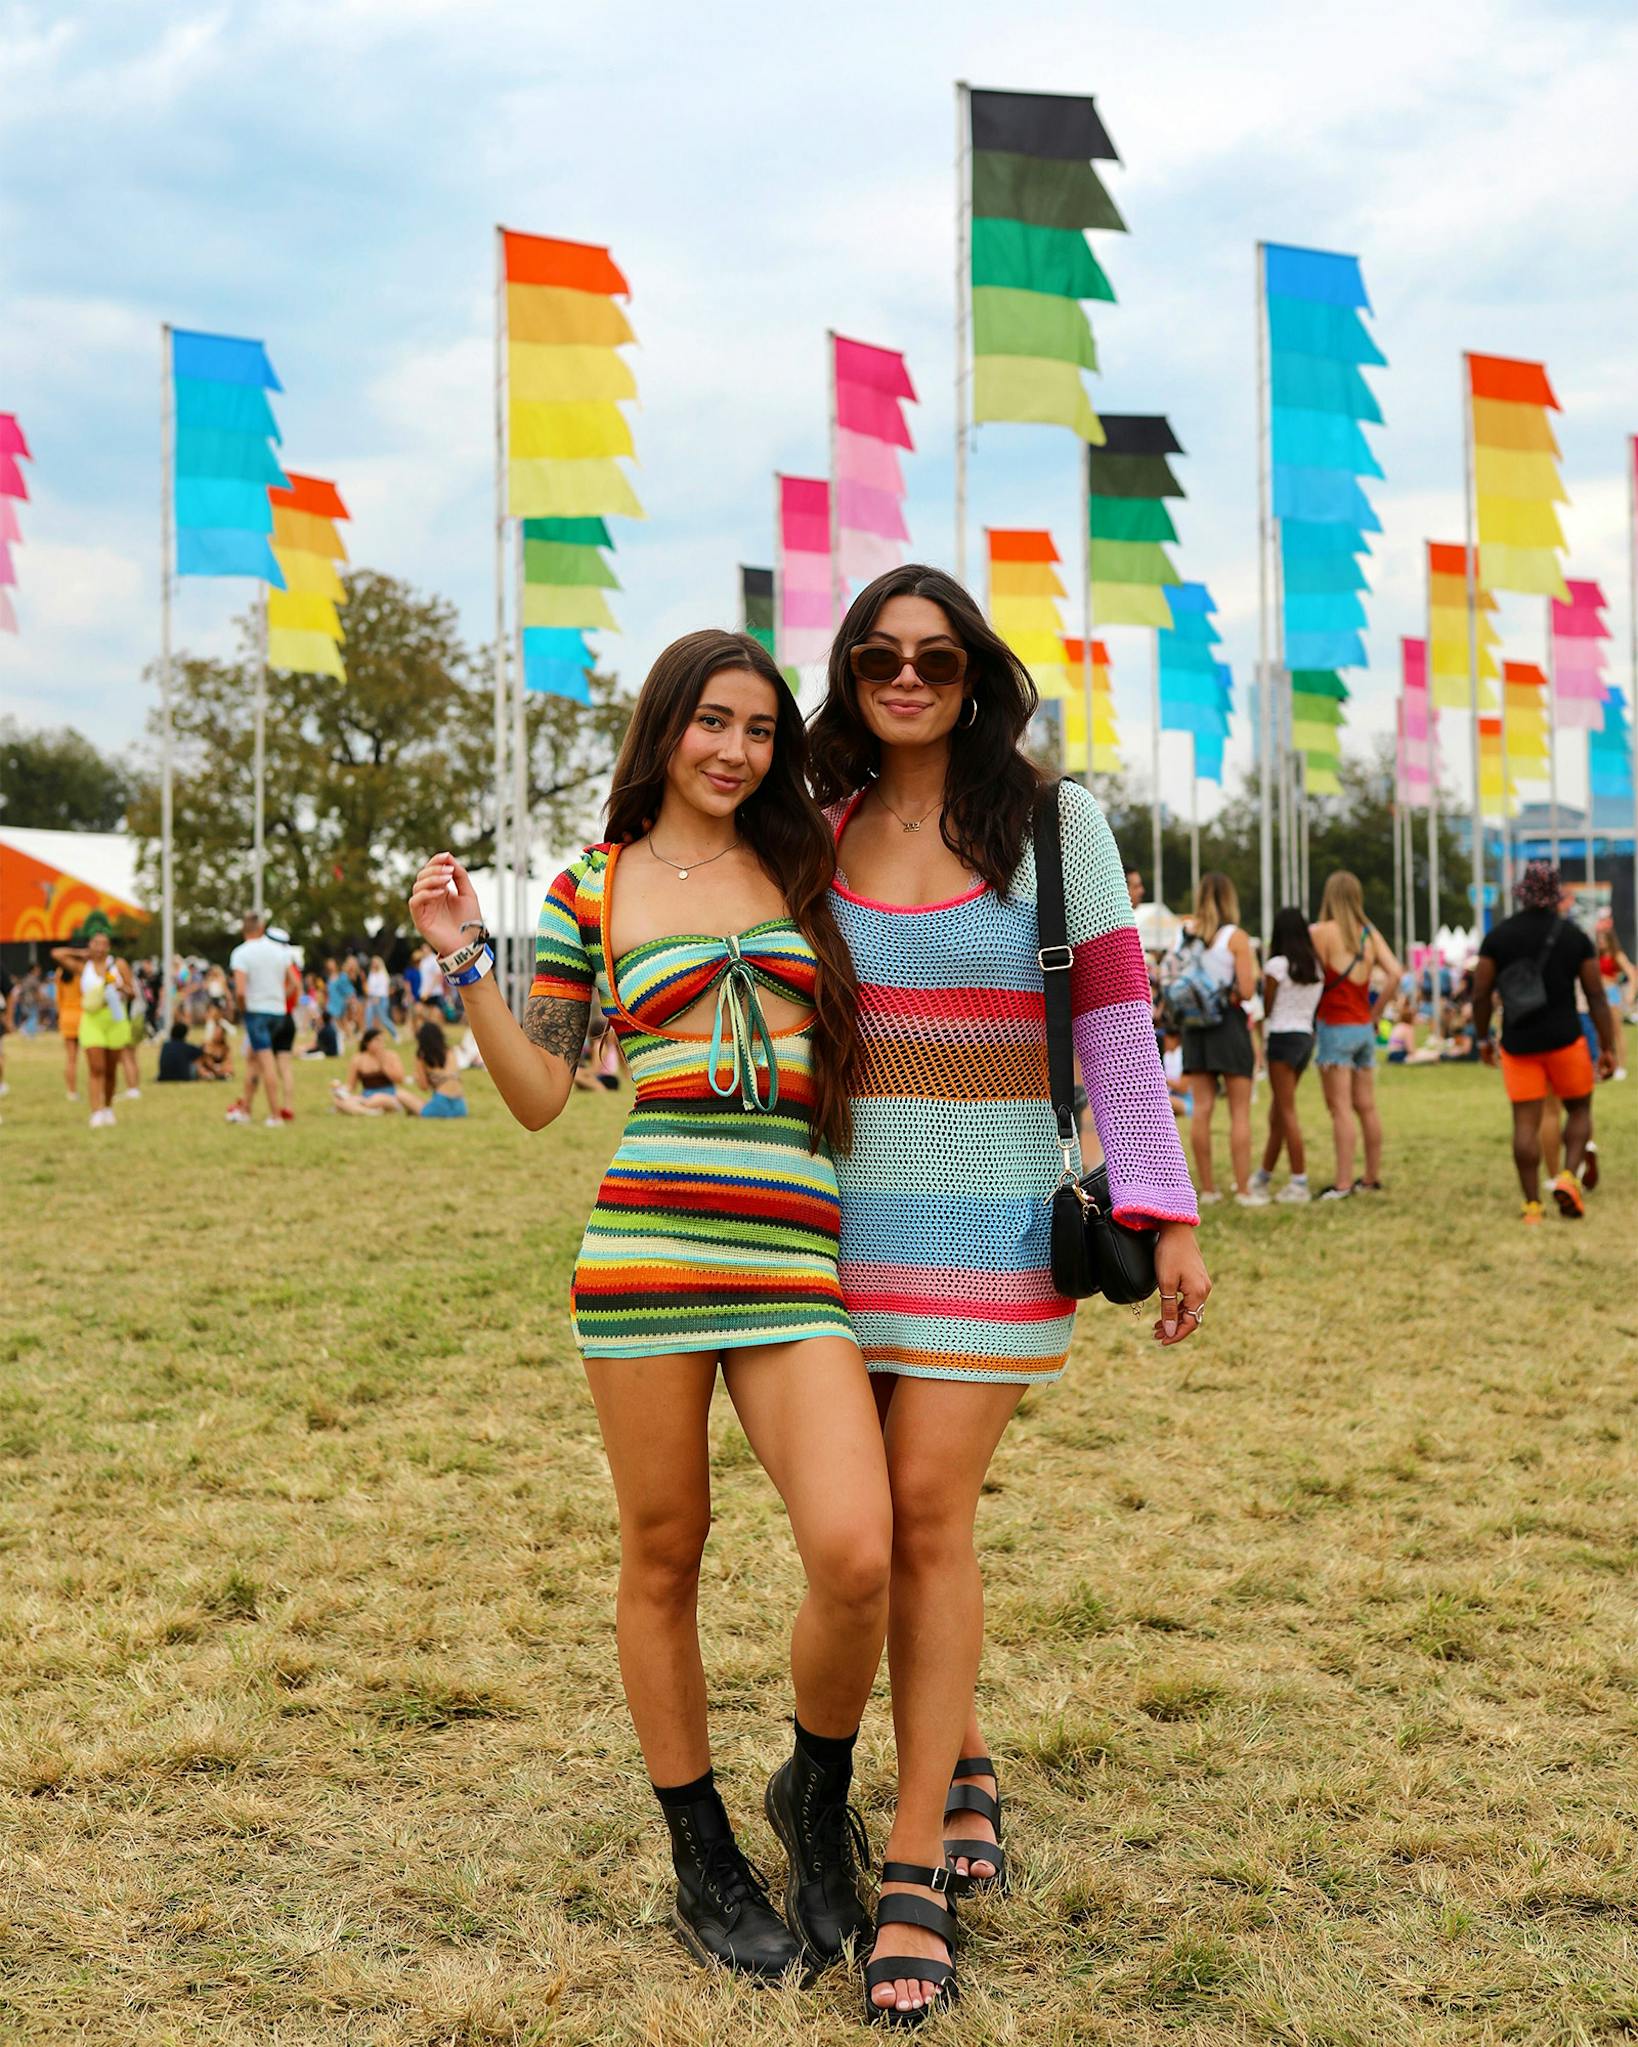 Festival Fashion Guide 2022 - What To Wear To Festivals This Year